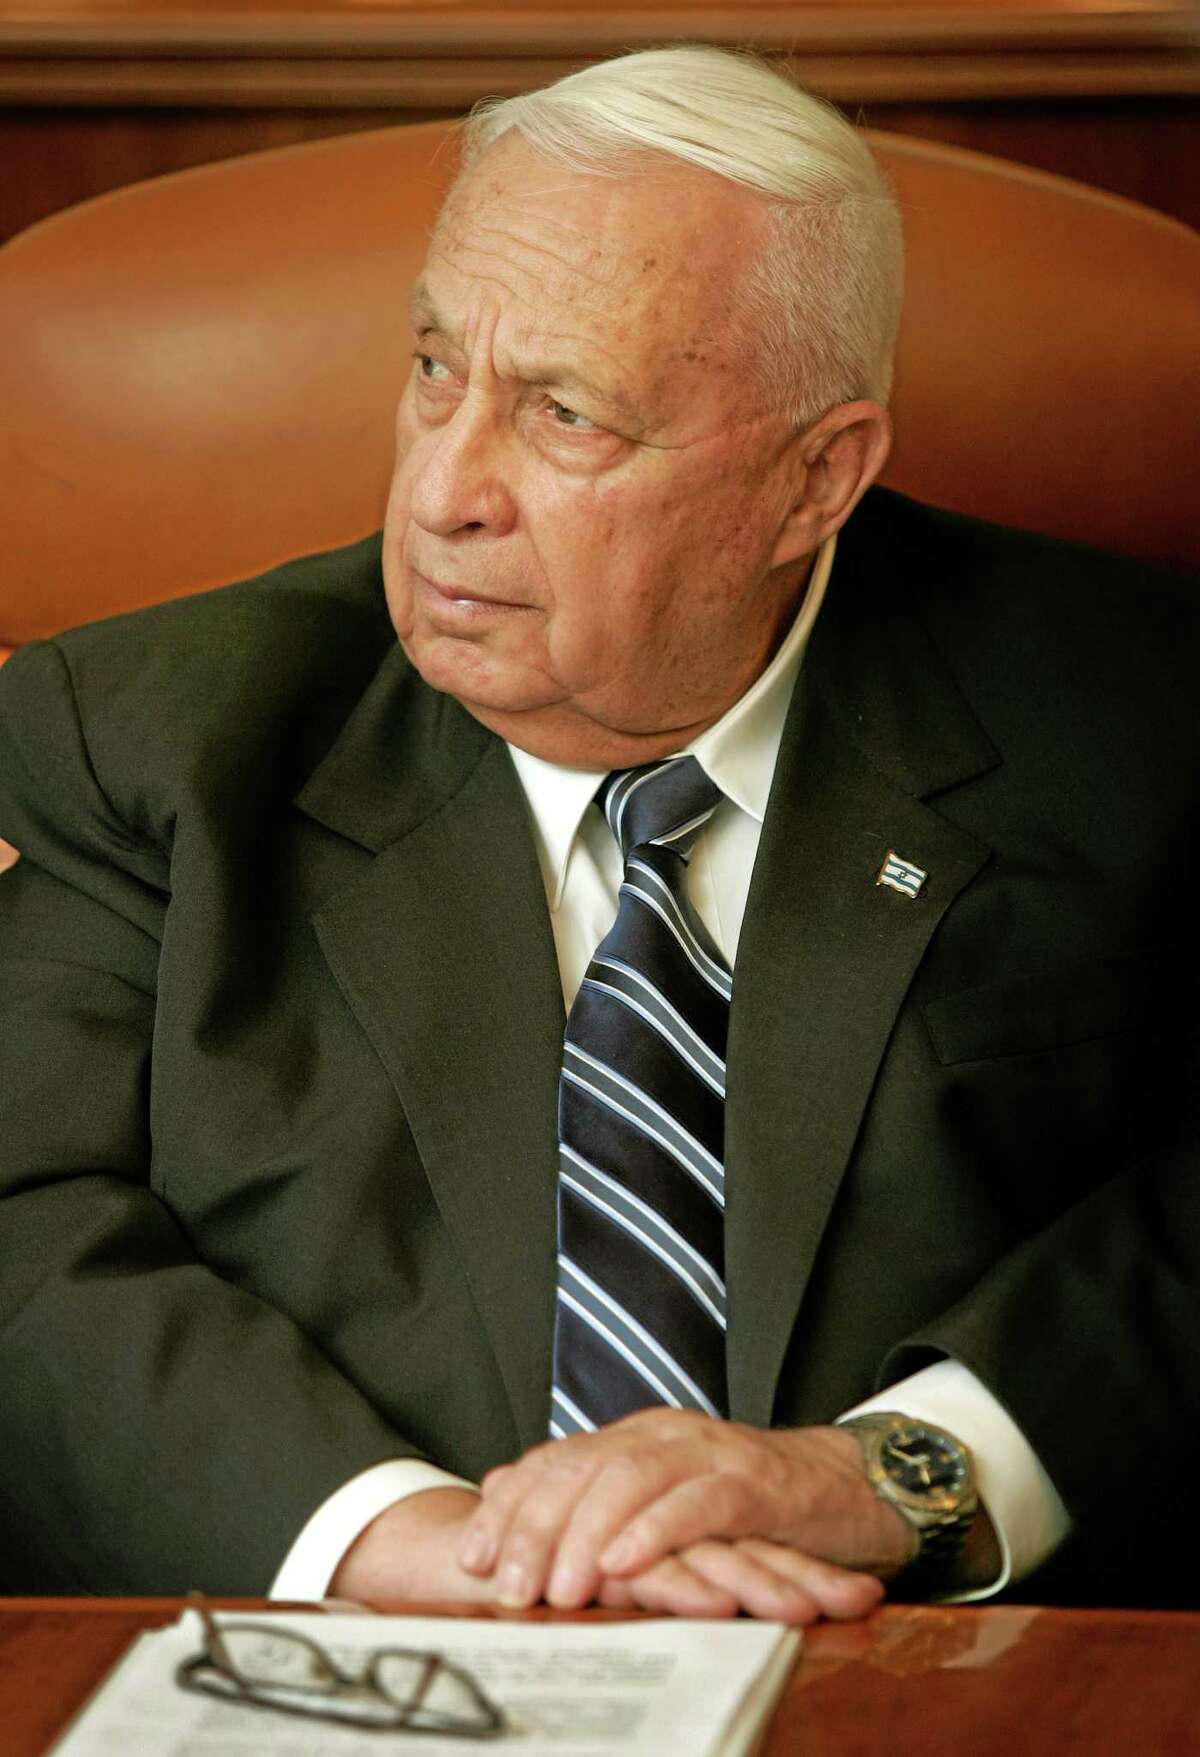 FILE - In this Dec. 12, 2005, photo file photo, Israeli Prime Minster Ariel Sharon attends a meeting at his office in Jerusalem. Sharon, the hard-charging Israeli general and prime minister who was admired and hated for his battlefield exploits and ambitions to reshape the Middle East, died Saturday, Jan. 11, 2014. He was 85. (AP Photo/Oded Balilty, File)